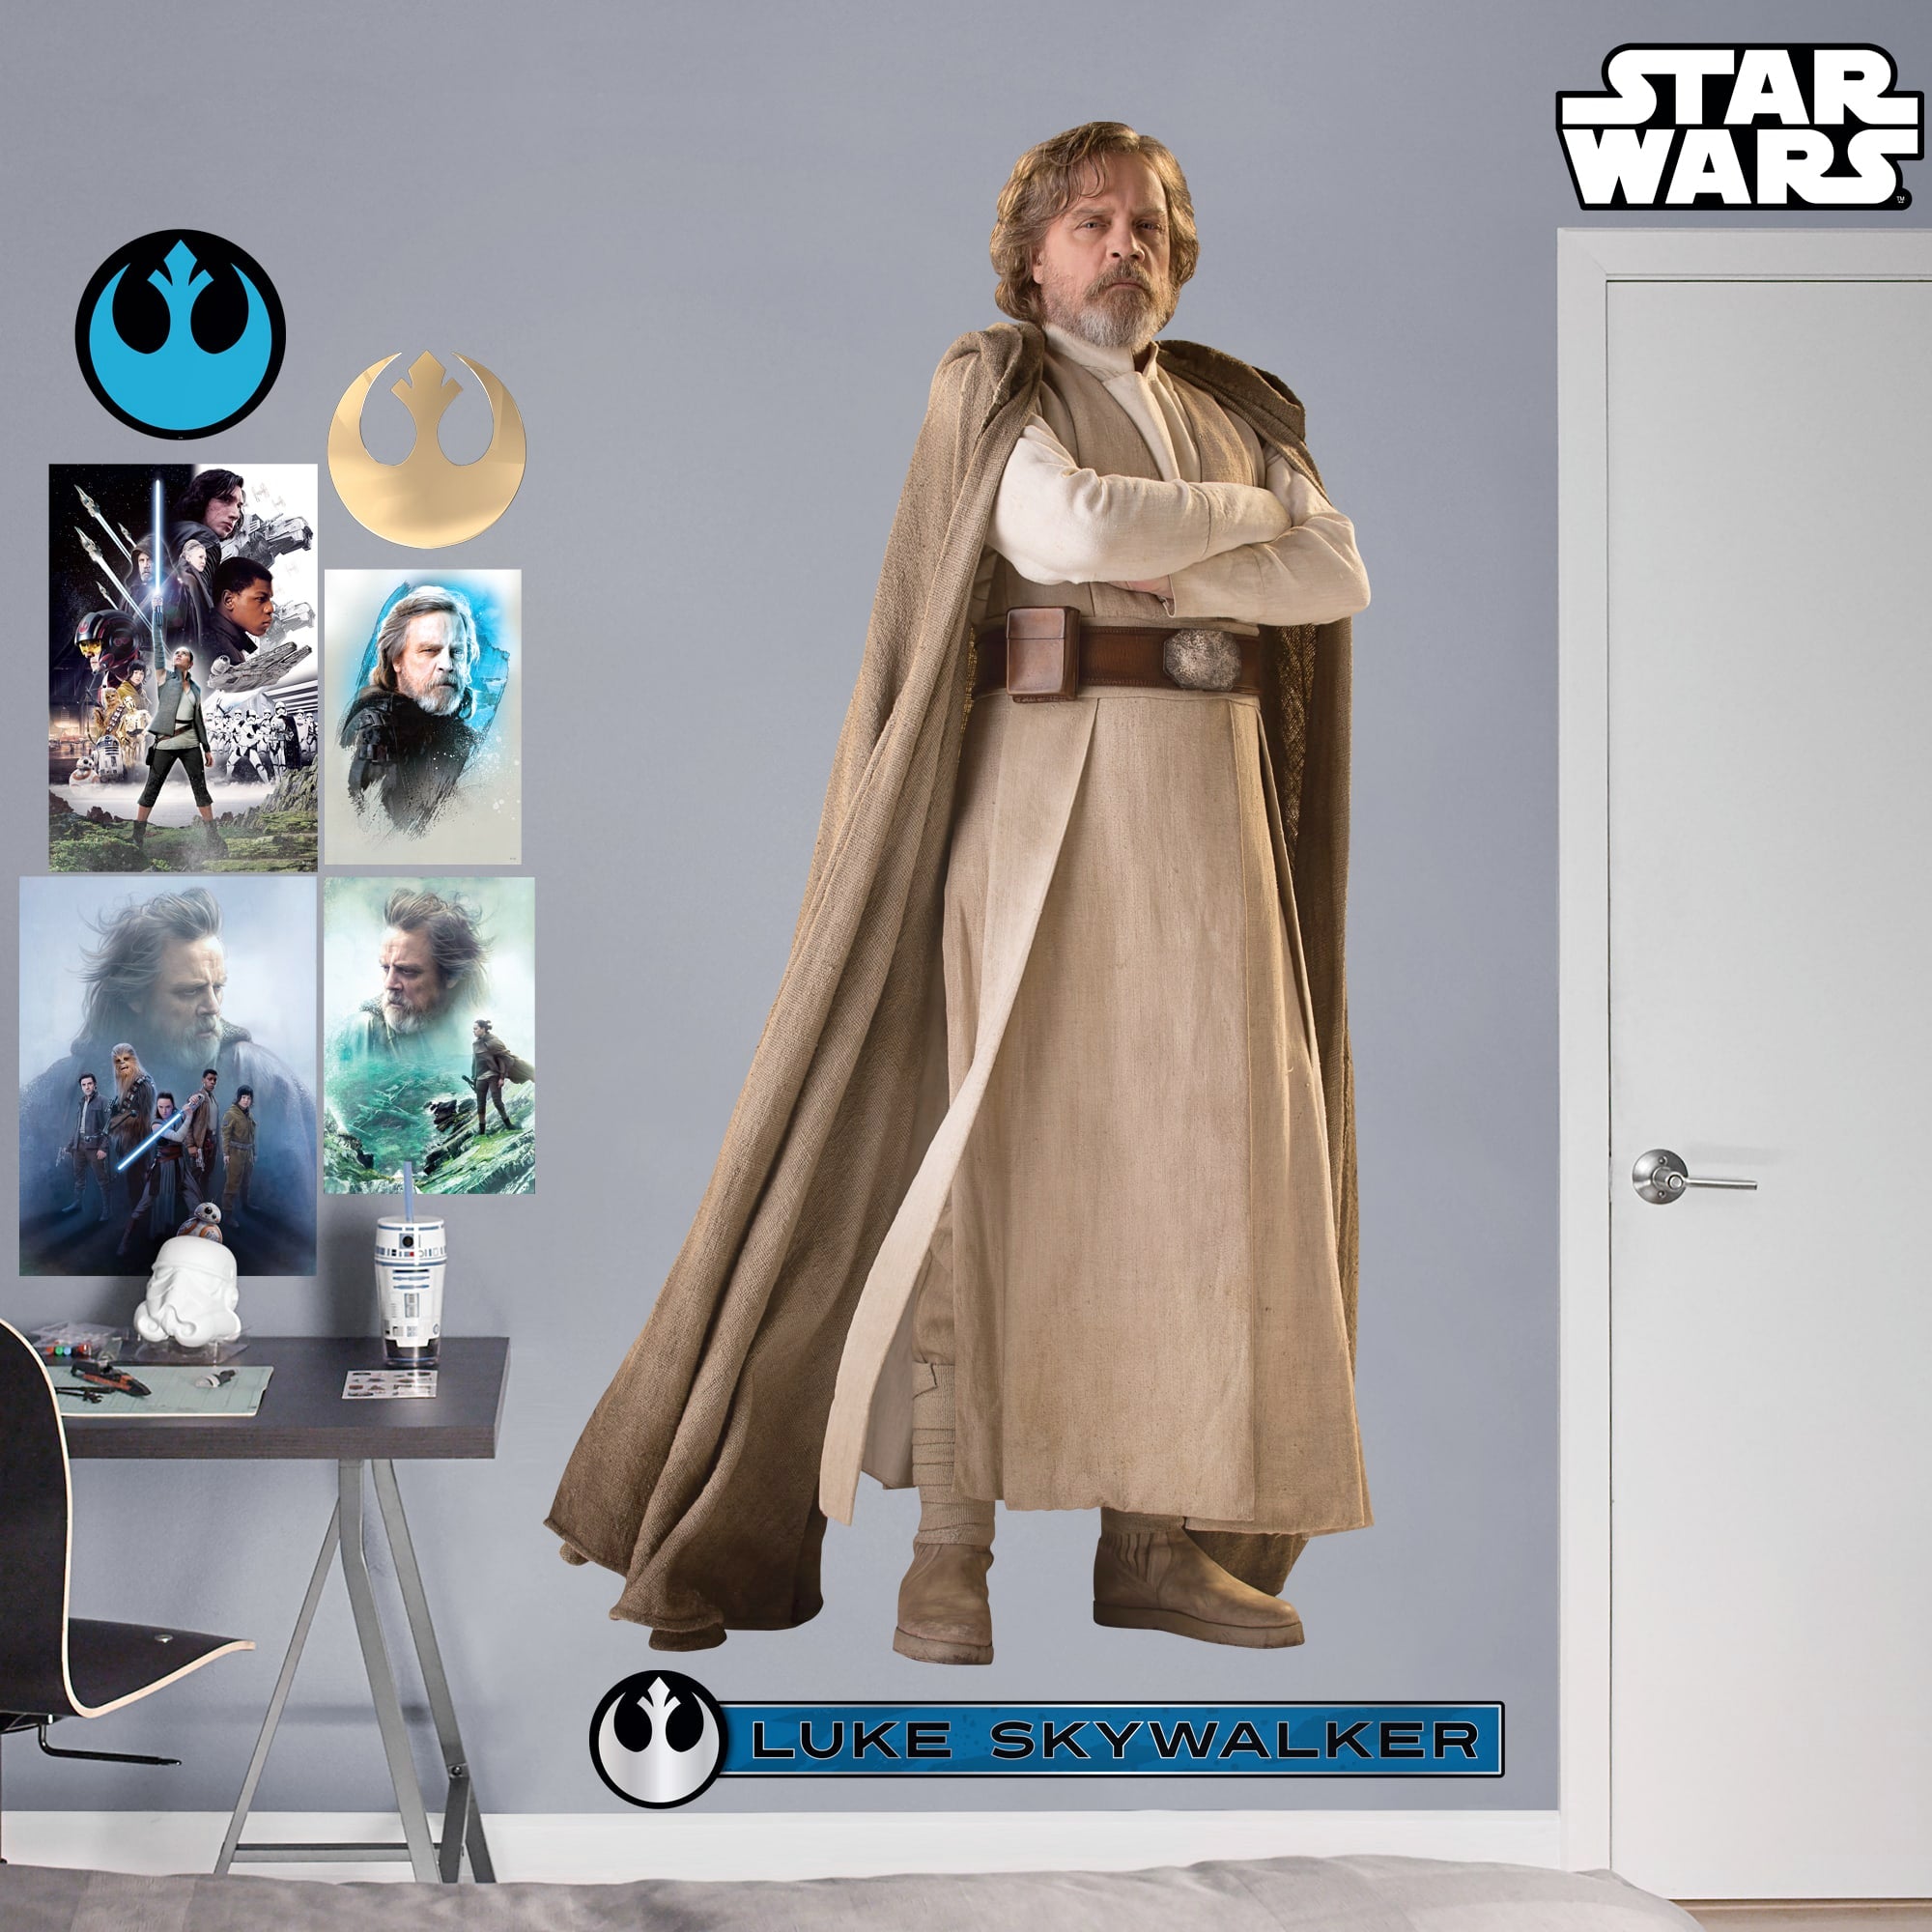 Luke Skywalker: Jedi Master - Officially Licensed Removable Wall Decal Life-Size Character + 8 Decals (40"W x 75"H) by Fathead |